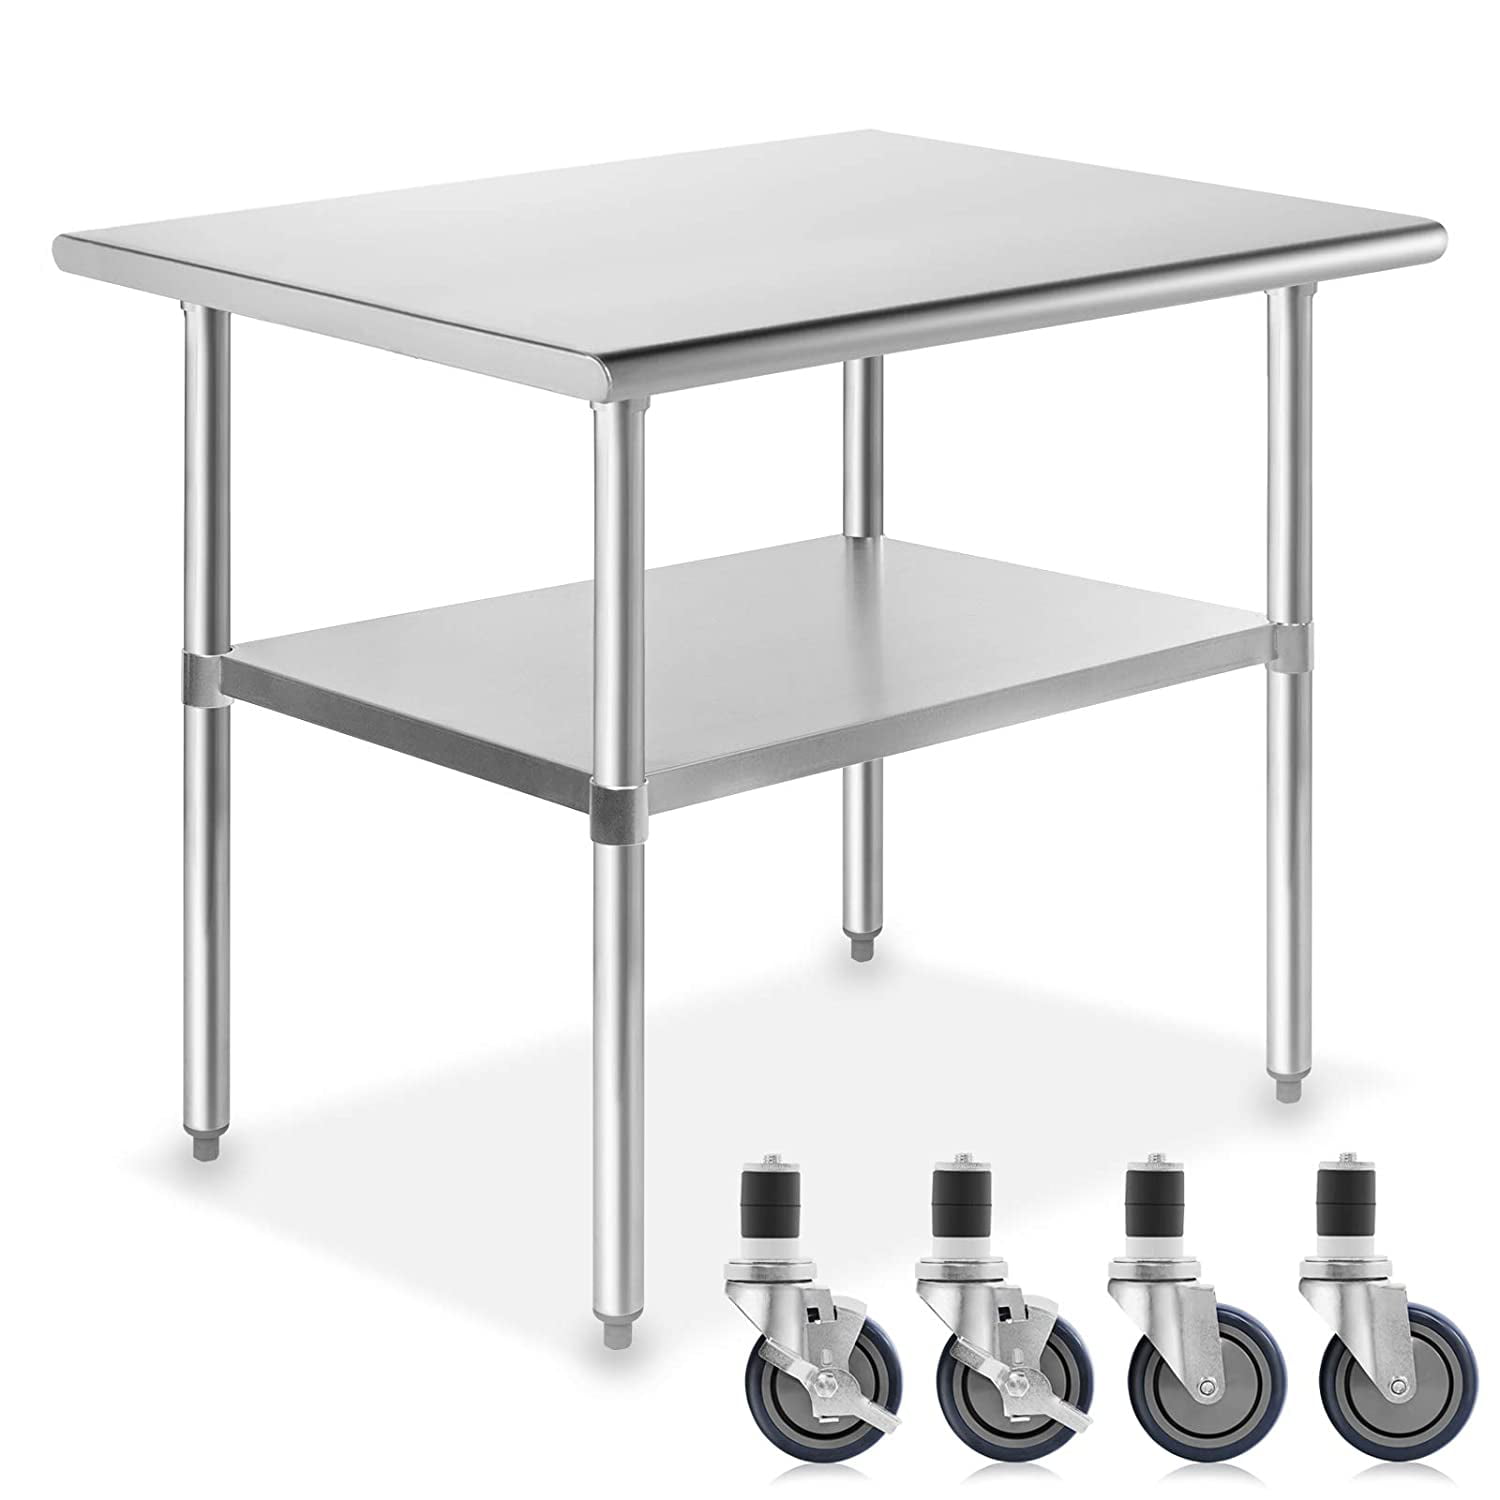 NSF Stainless Steel Commercial Kitchen Prep & Work Table w/ 4 Casters Caster Wheels For Stainless Steel Tables